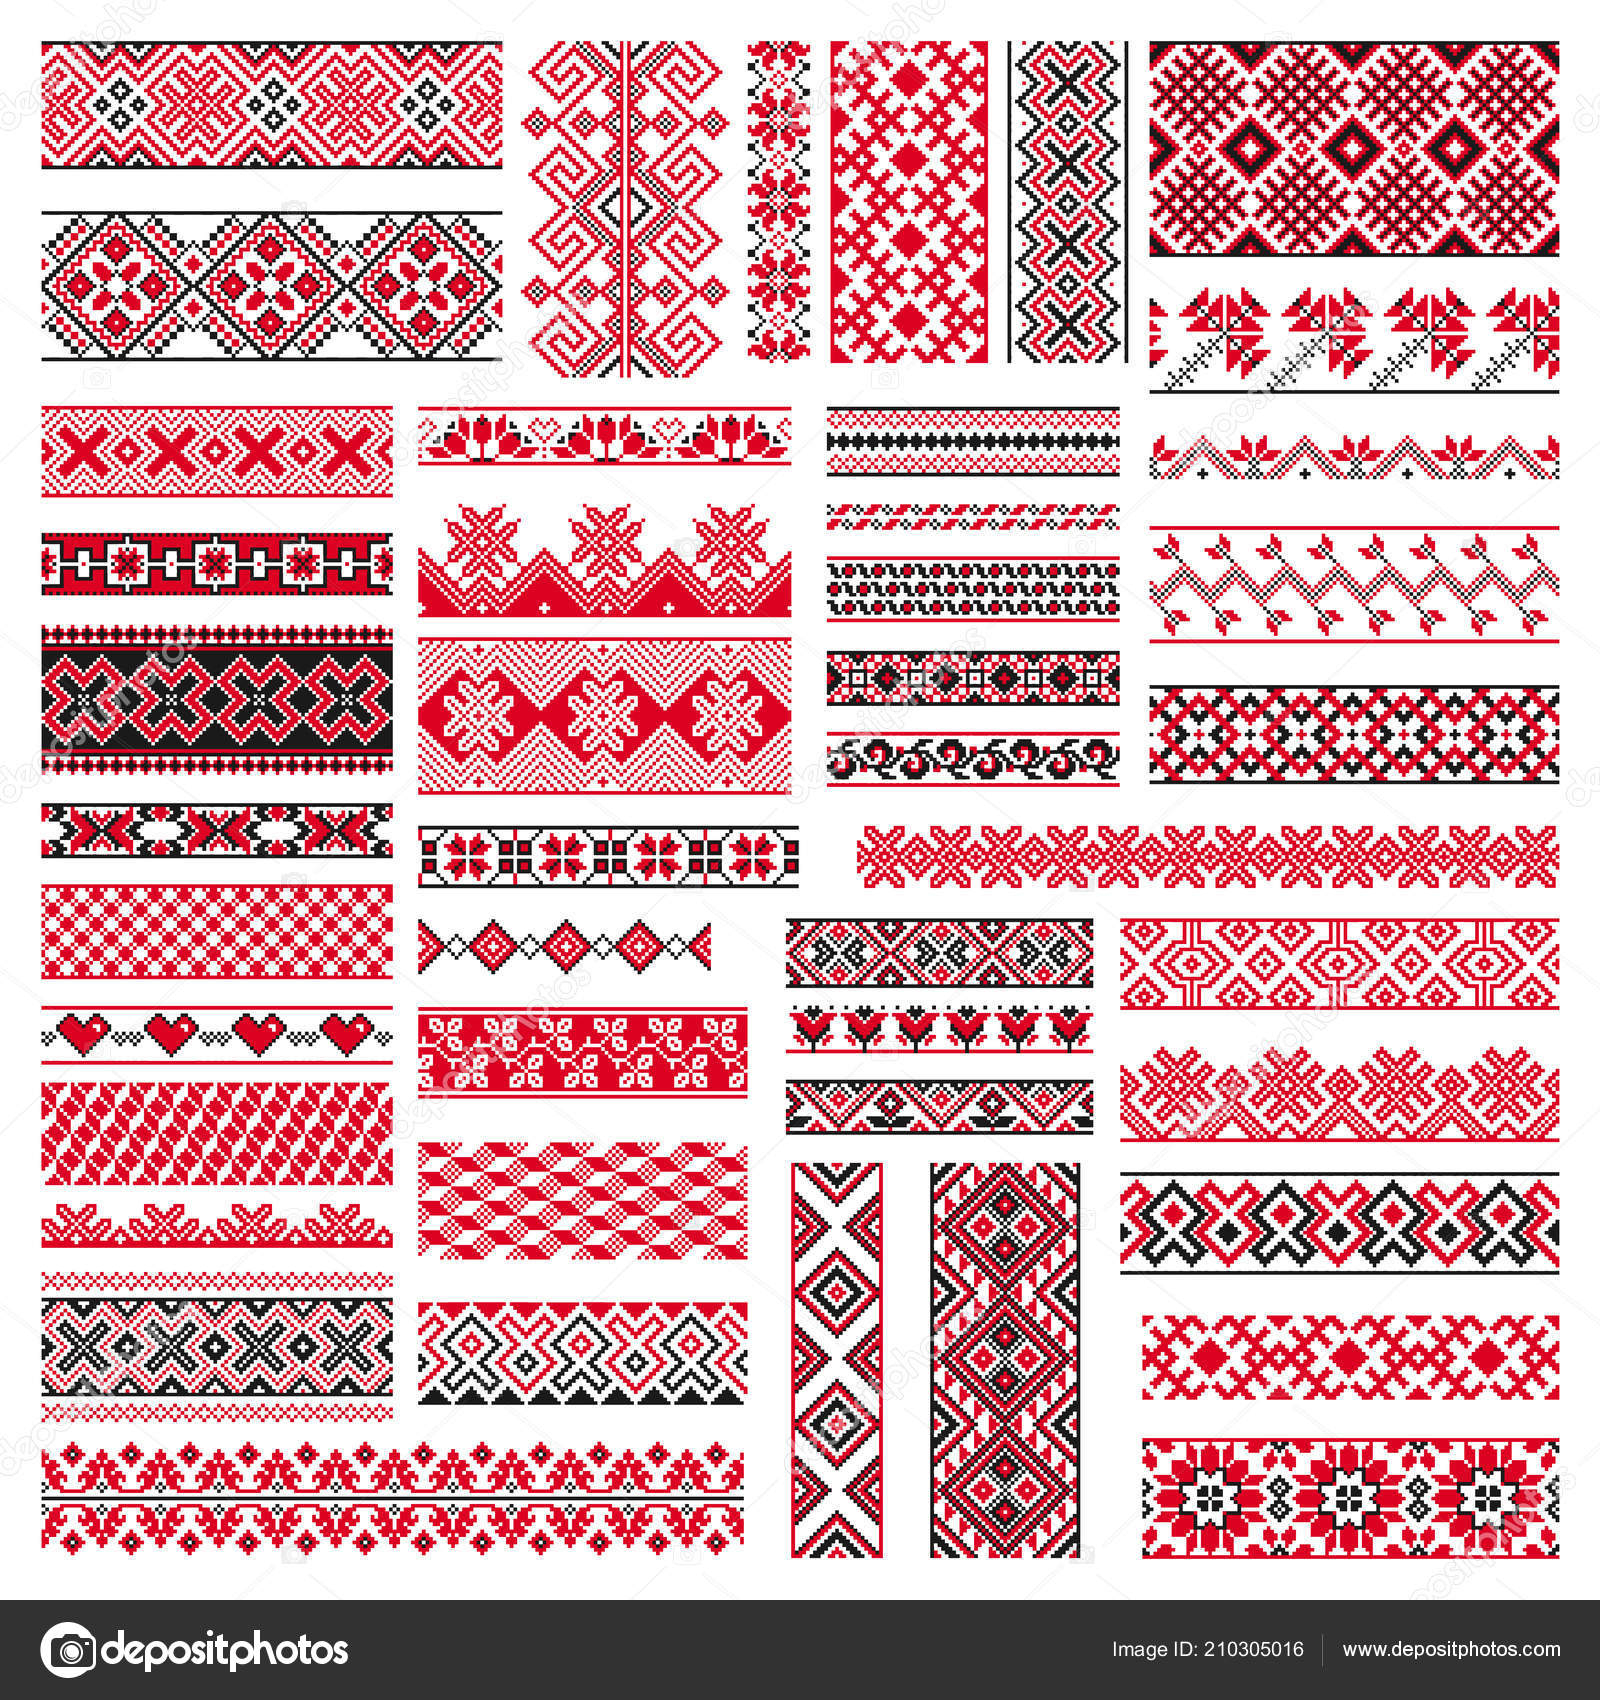 Geometric Embroidery Patterns Big Set Traditional Embroidery Vector Illustration Ethnic Seamless